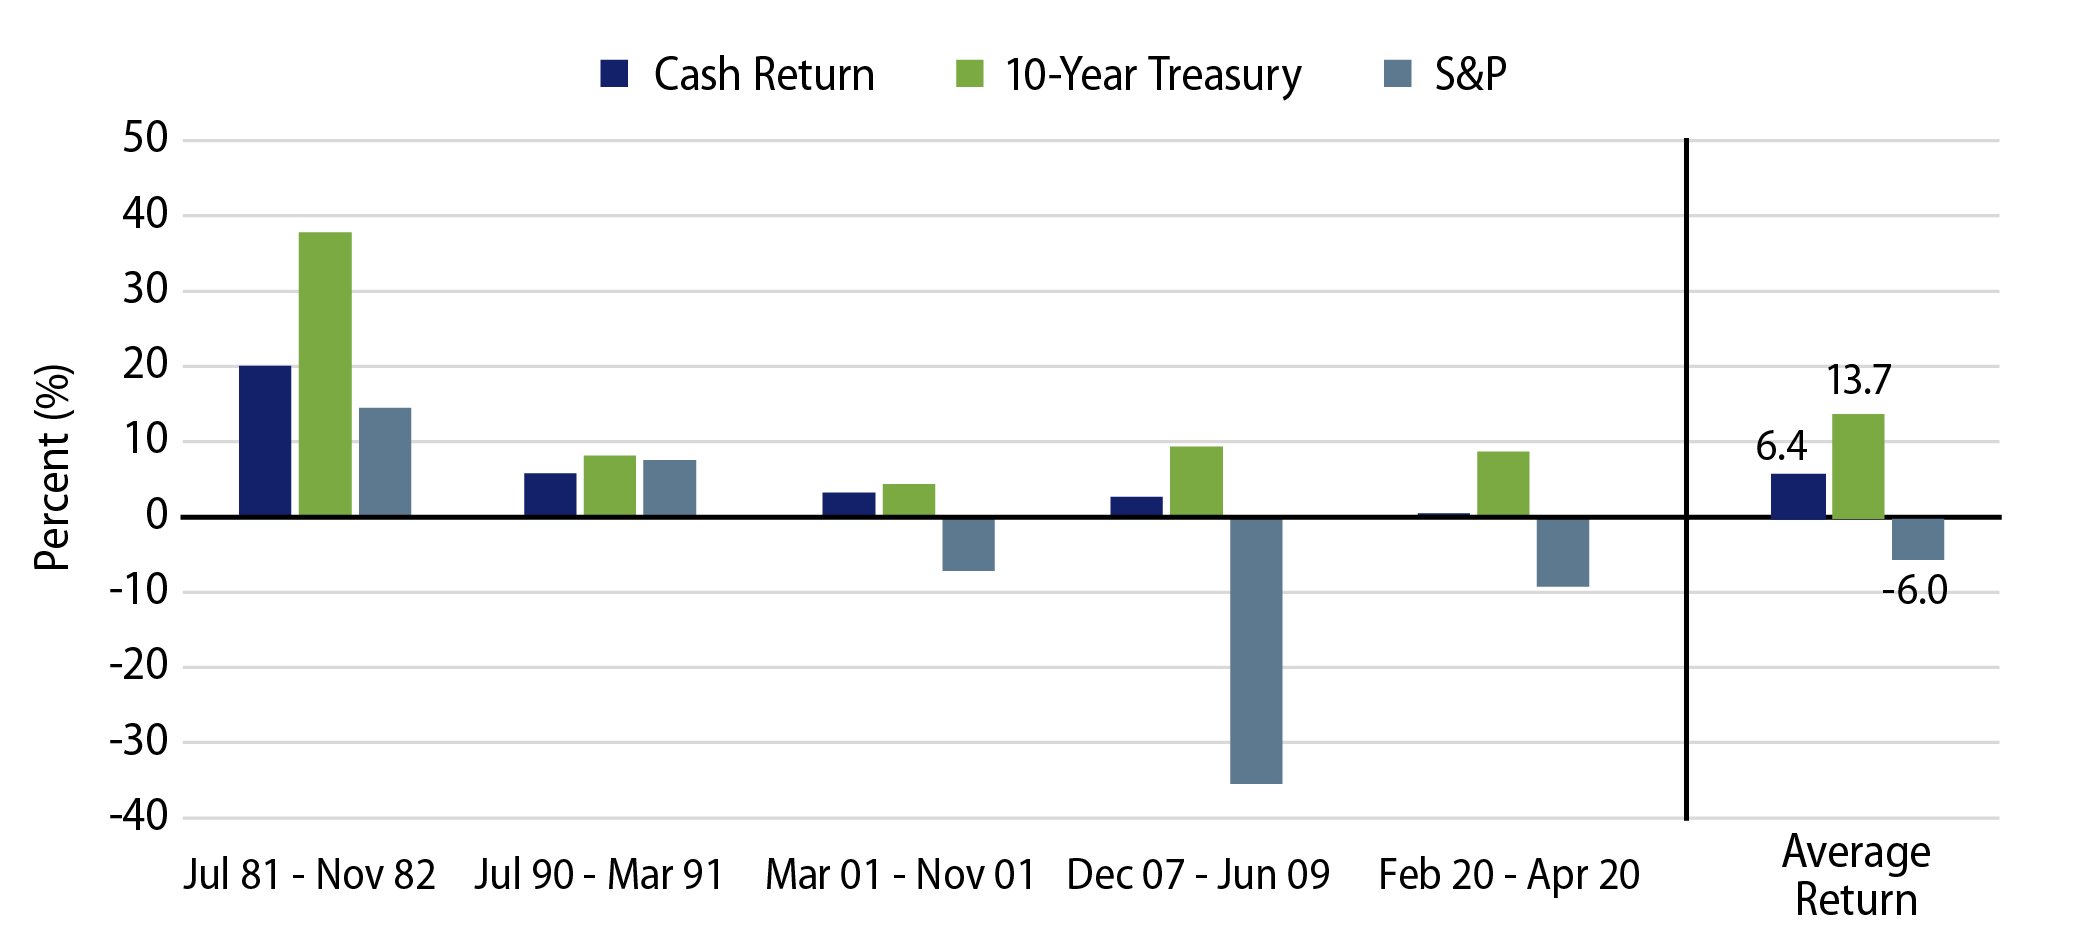 Performance During Recessions—Stocks, Bonds and Cash